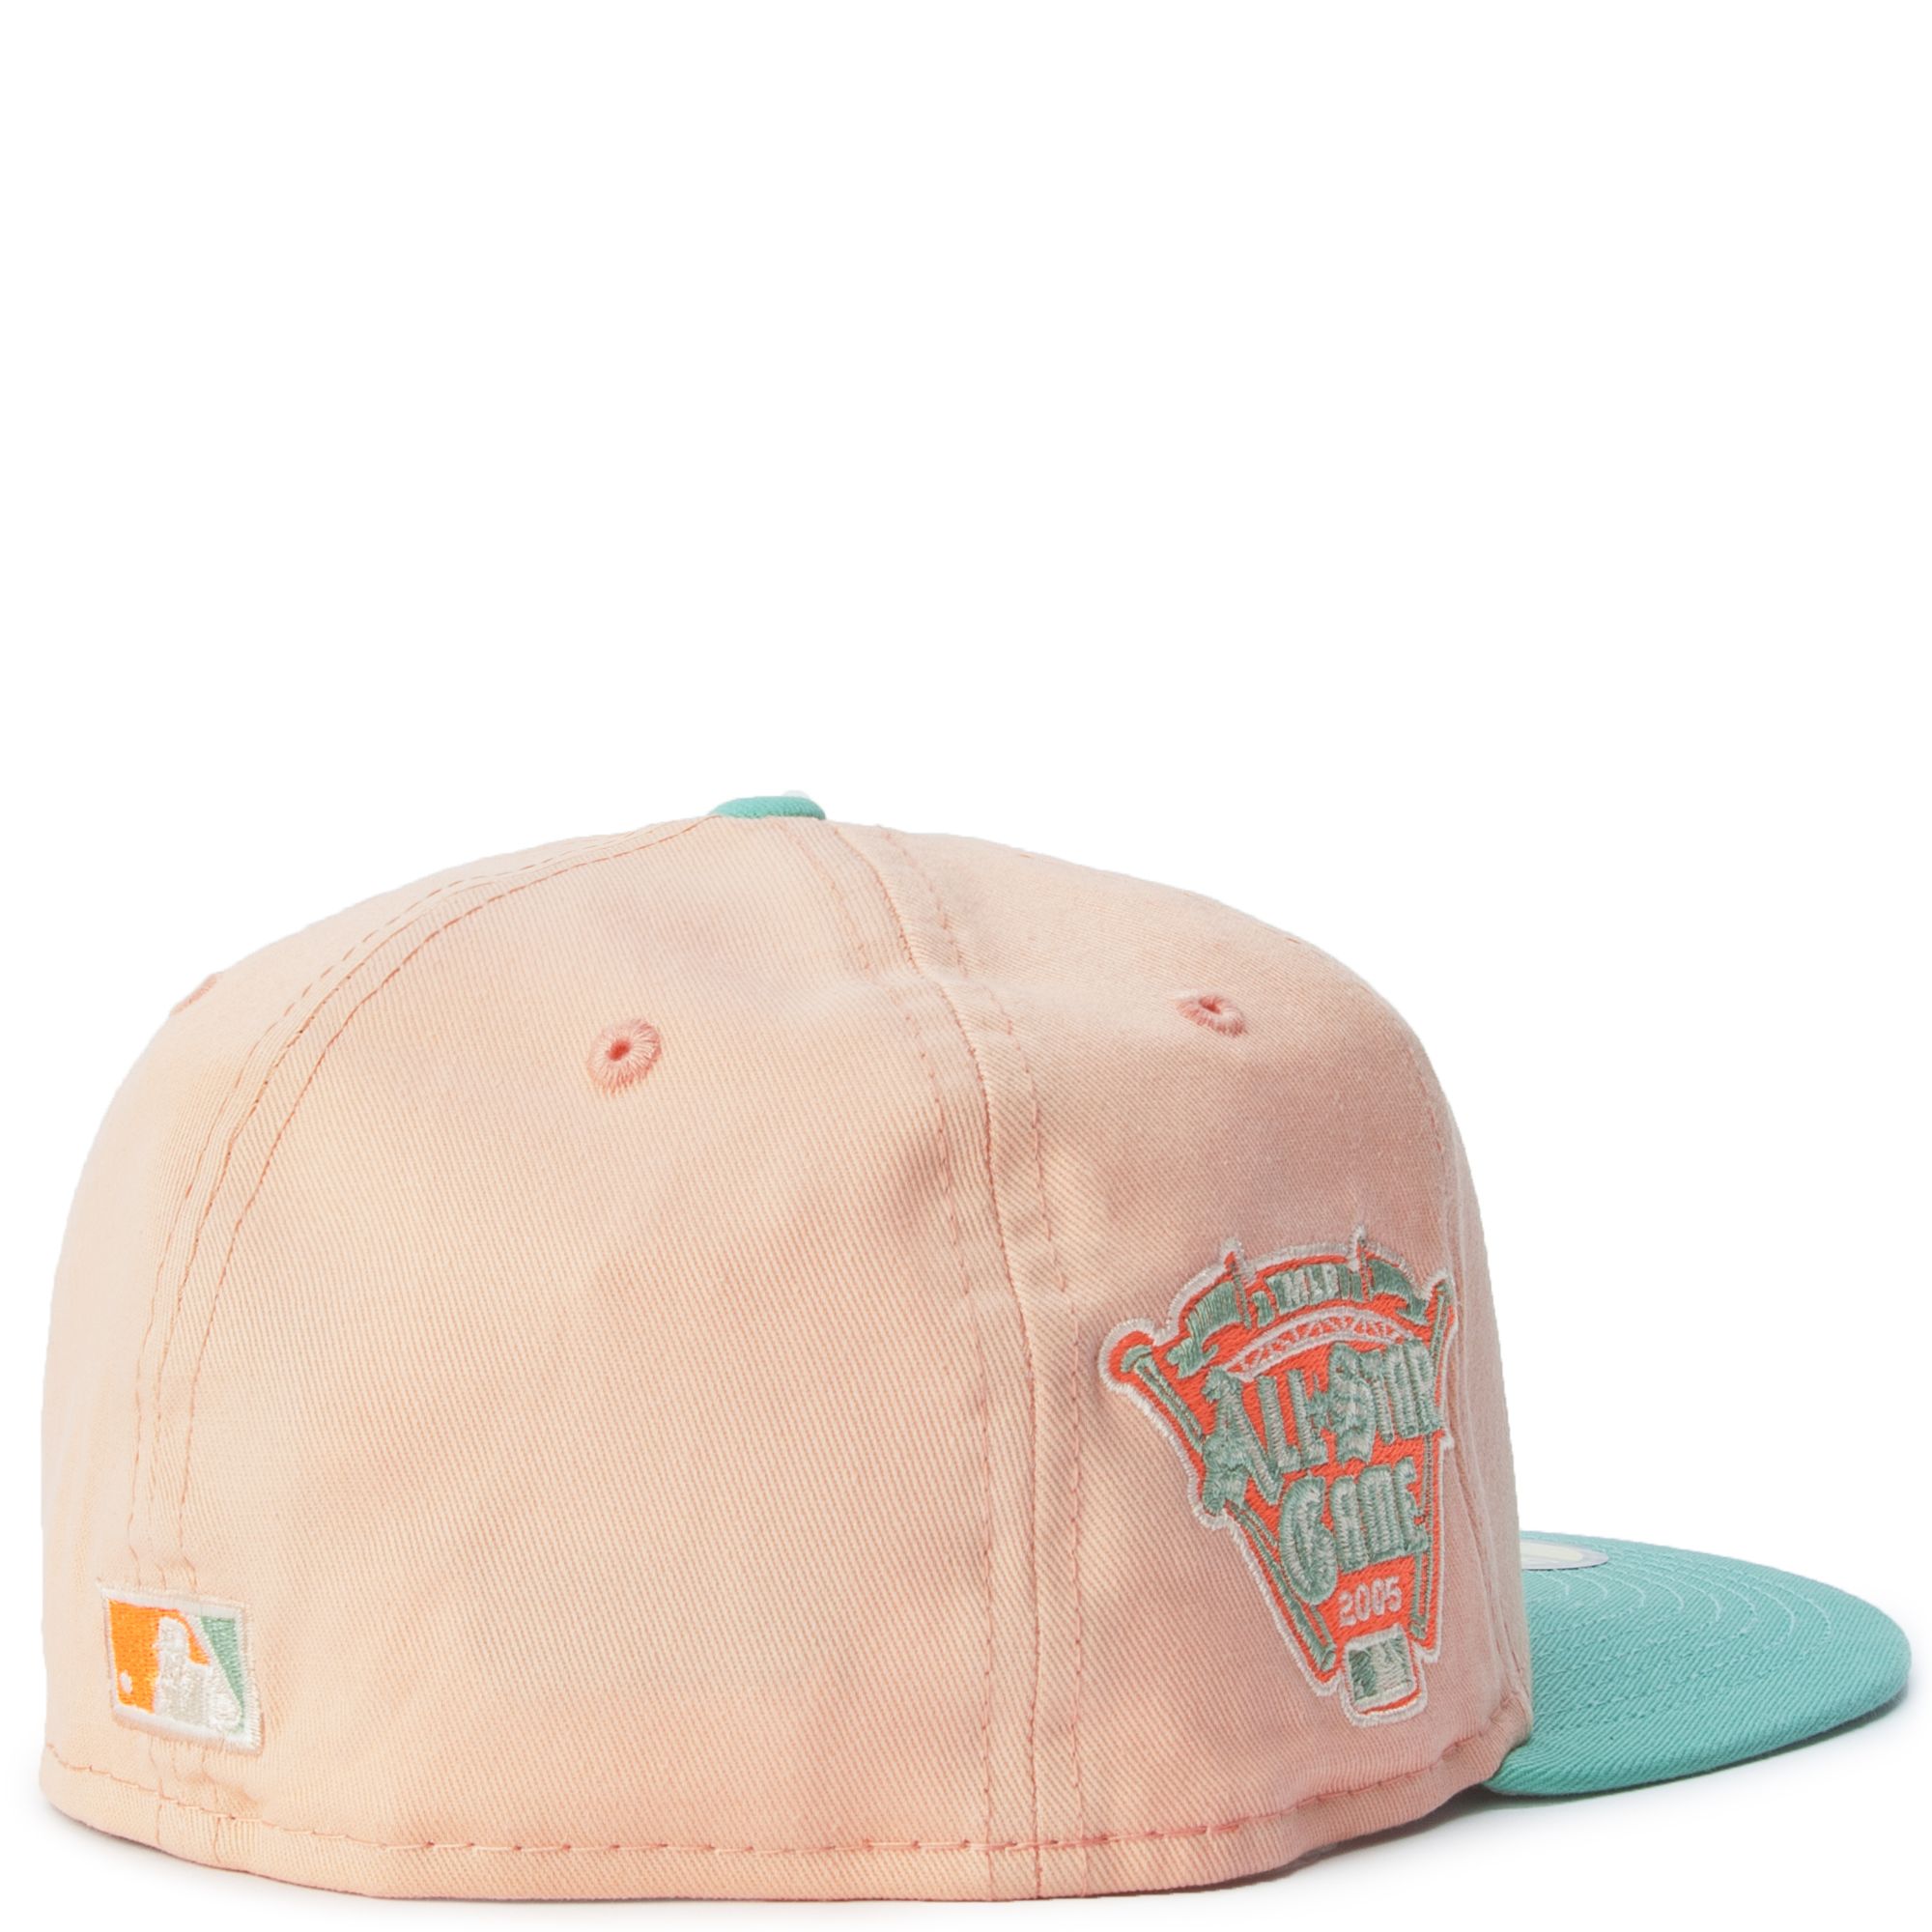 DETROIT TIGERS PEACH MINT 59FIFTY FITTED HAT 70725283